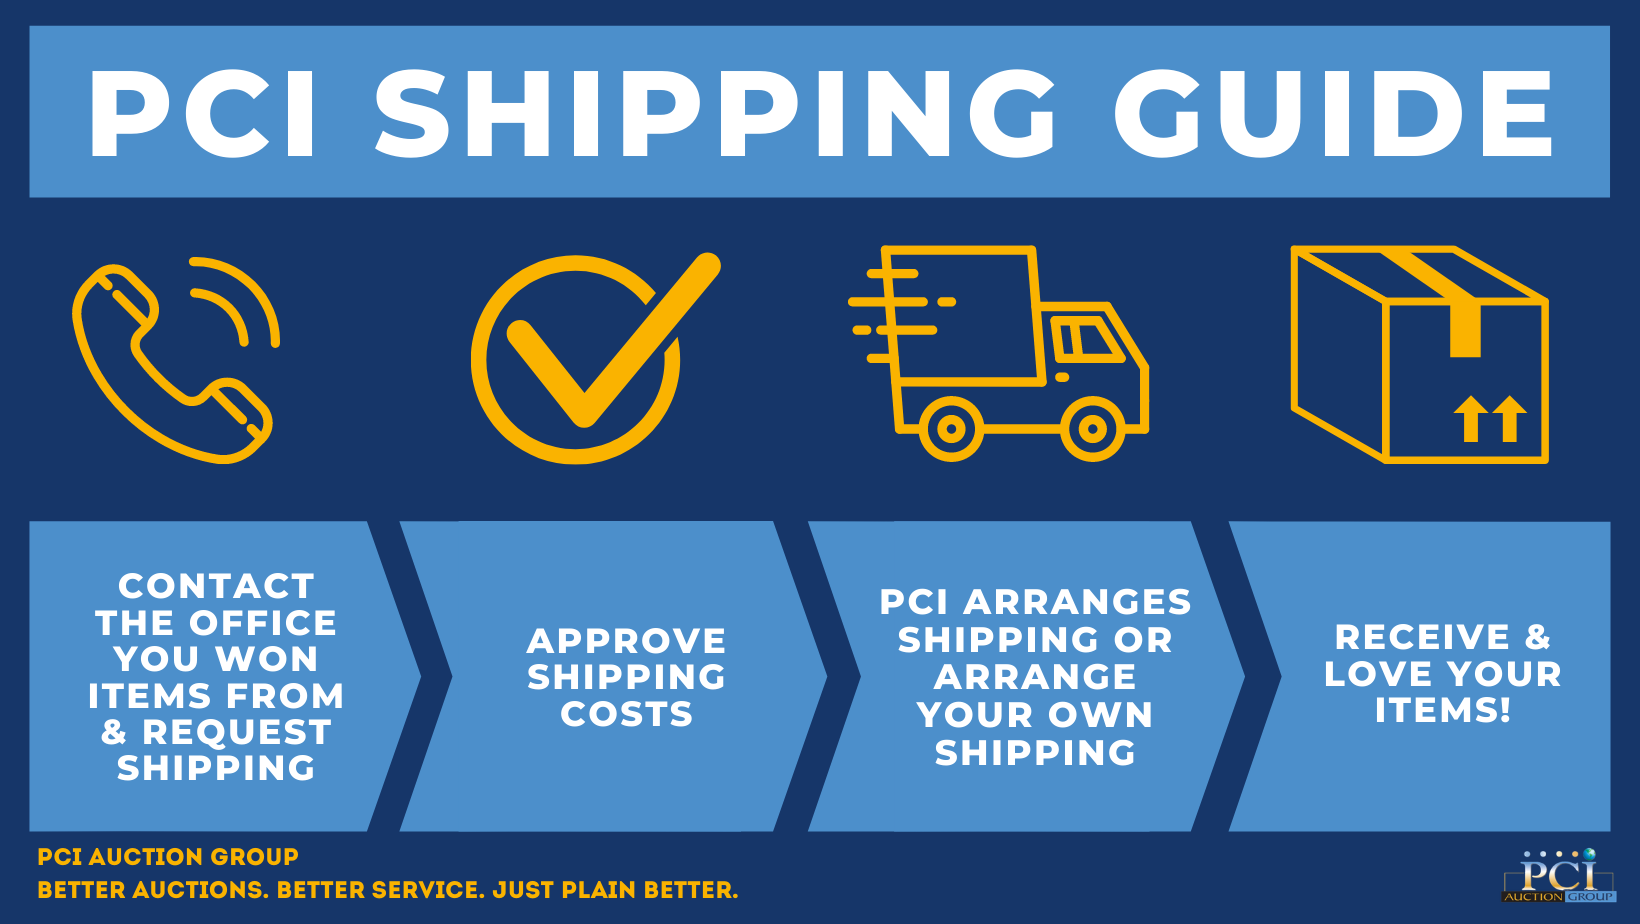 PCI Shipping Guide Graphic